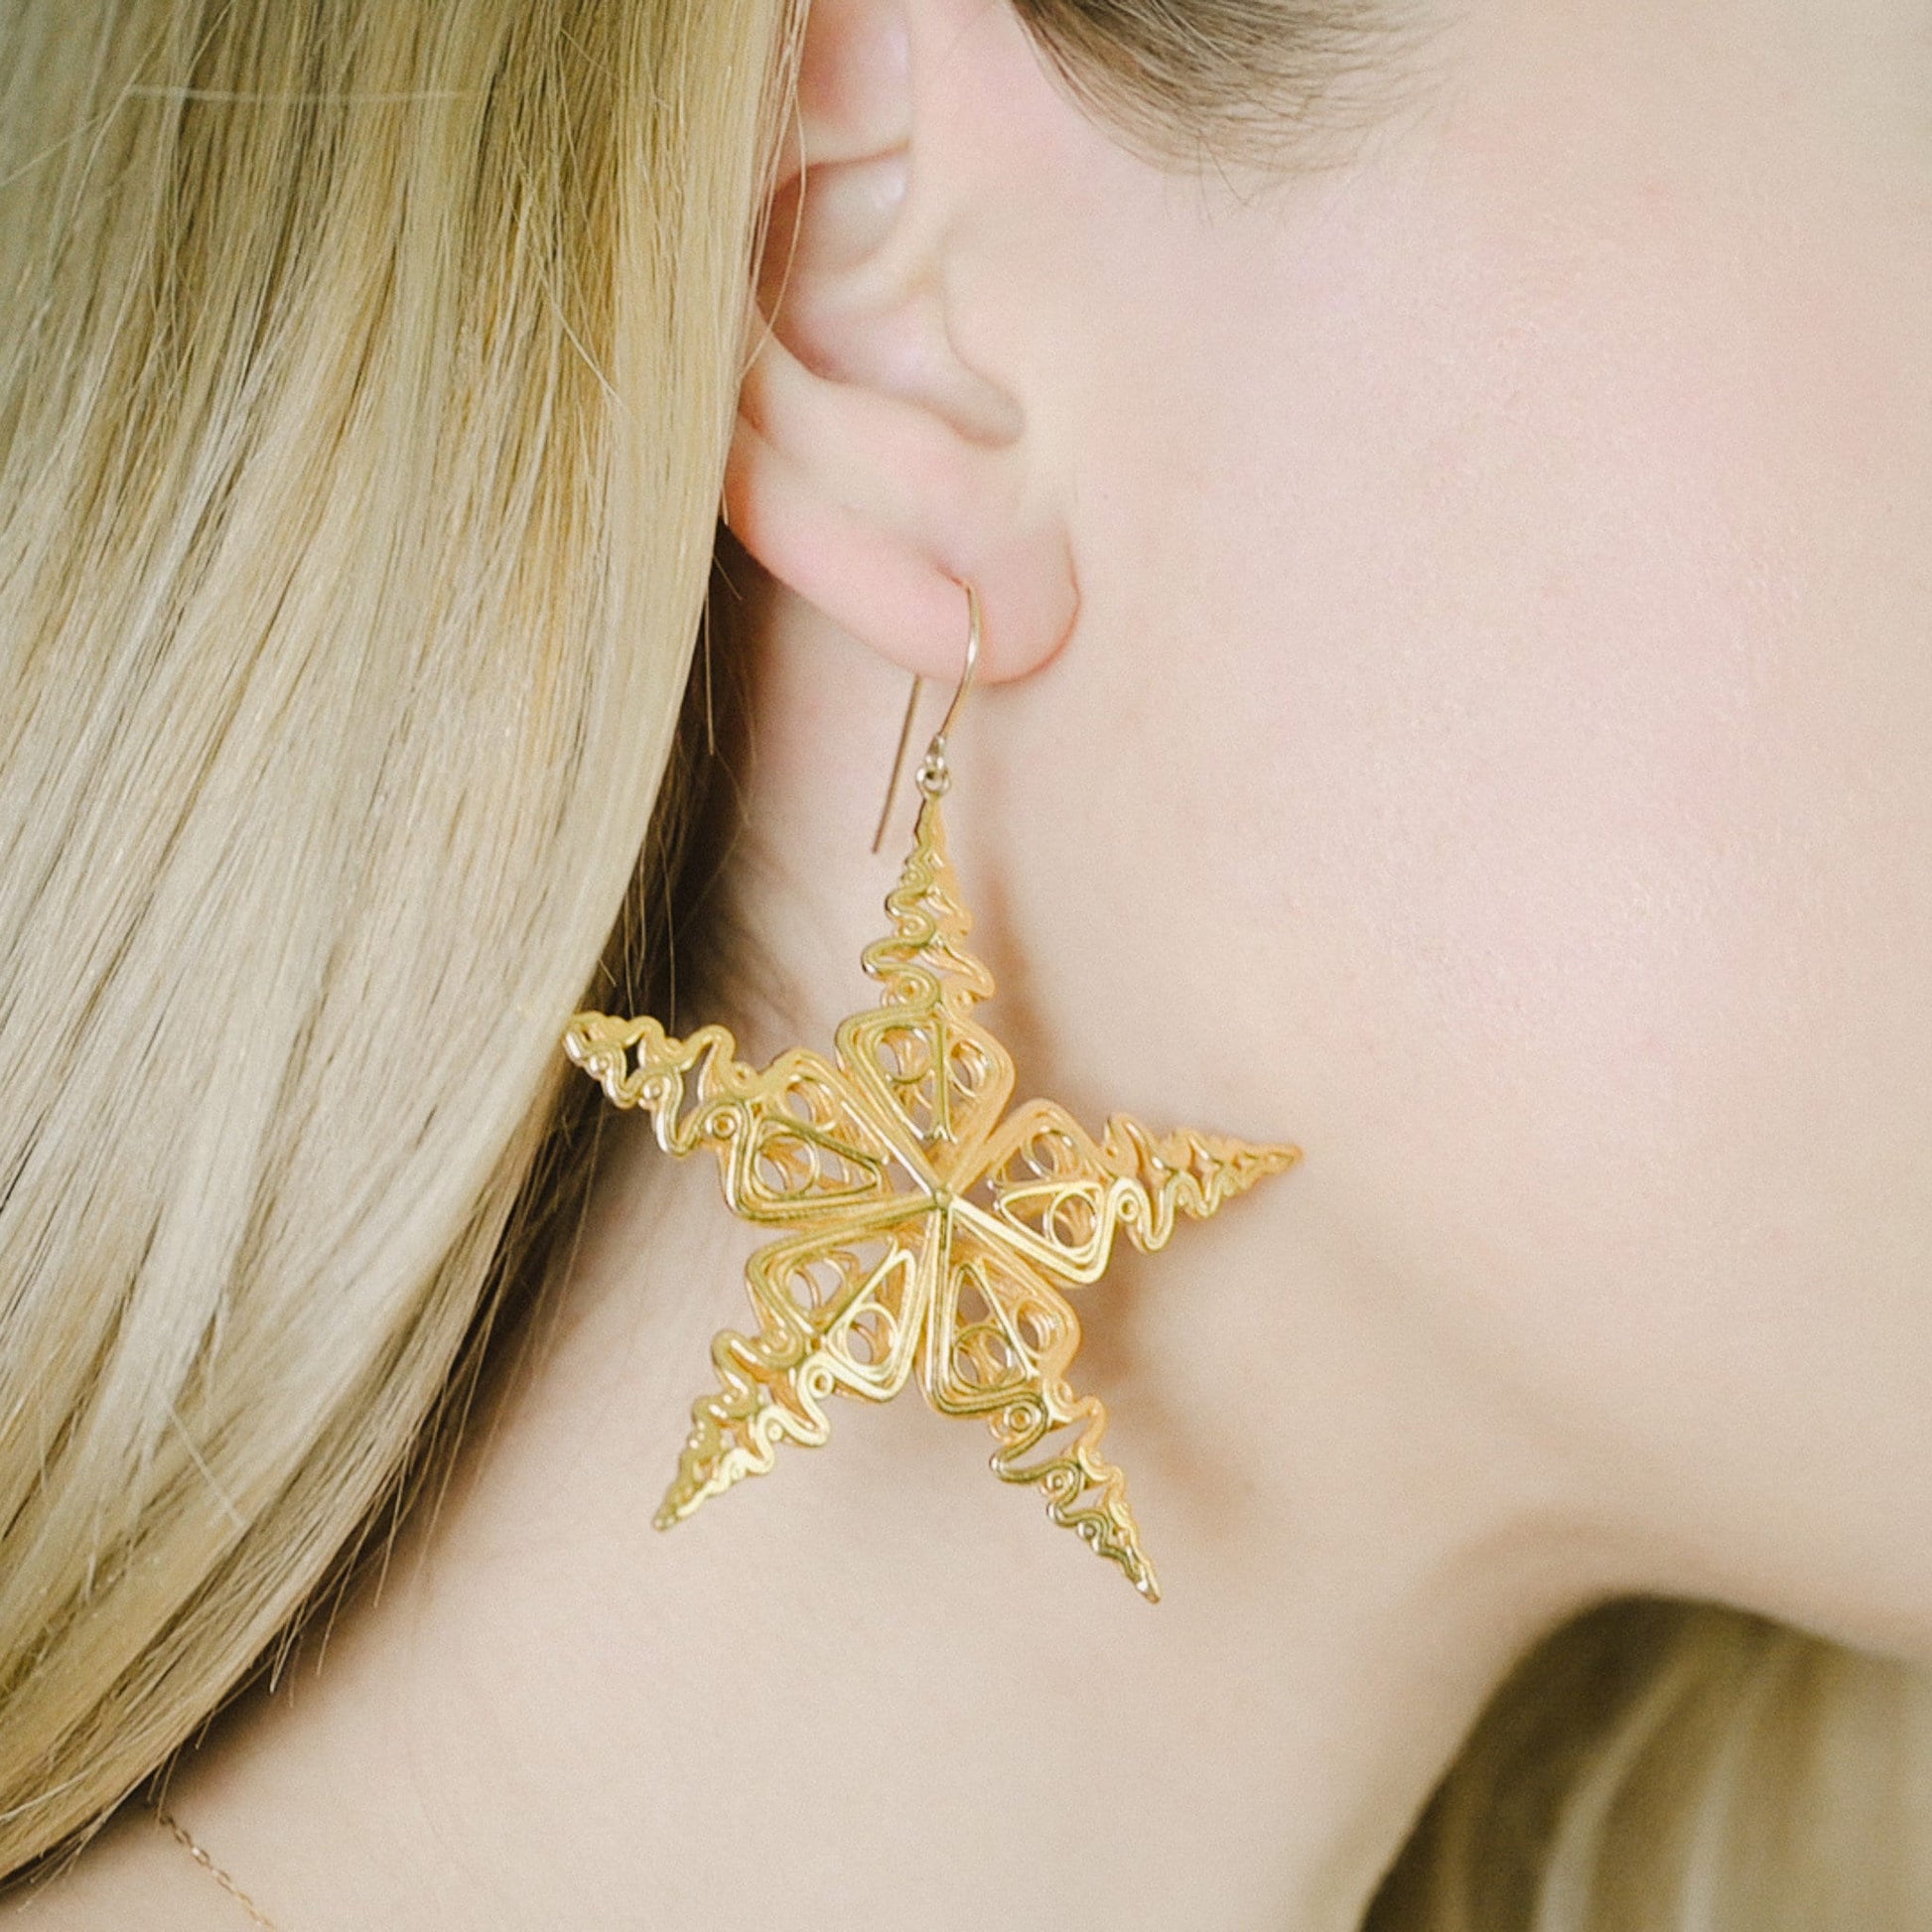 Celestial Star Earrings in Solid Silver, 14K Gold Plate, or Solid Gold